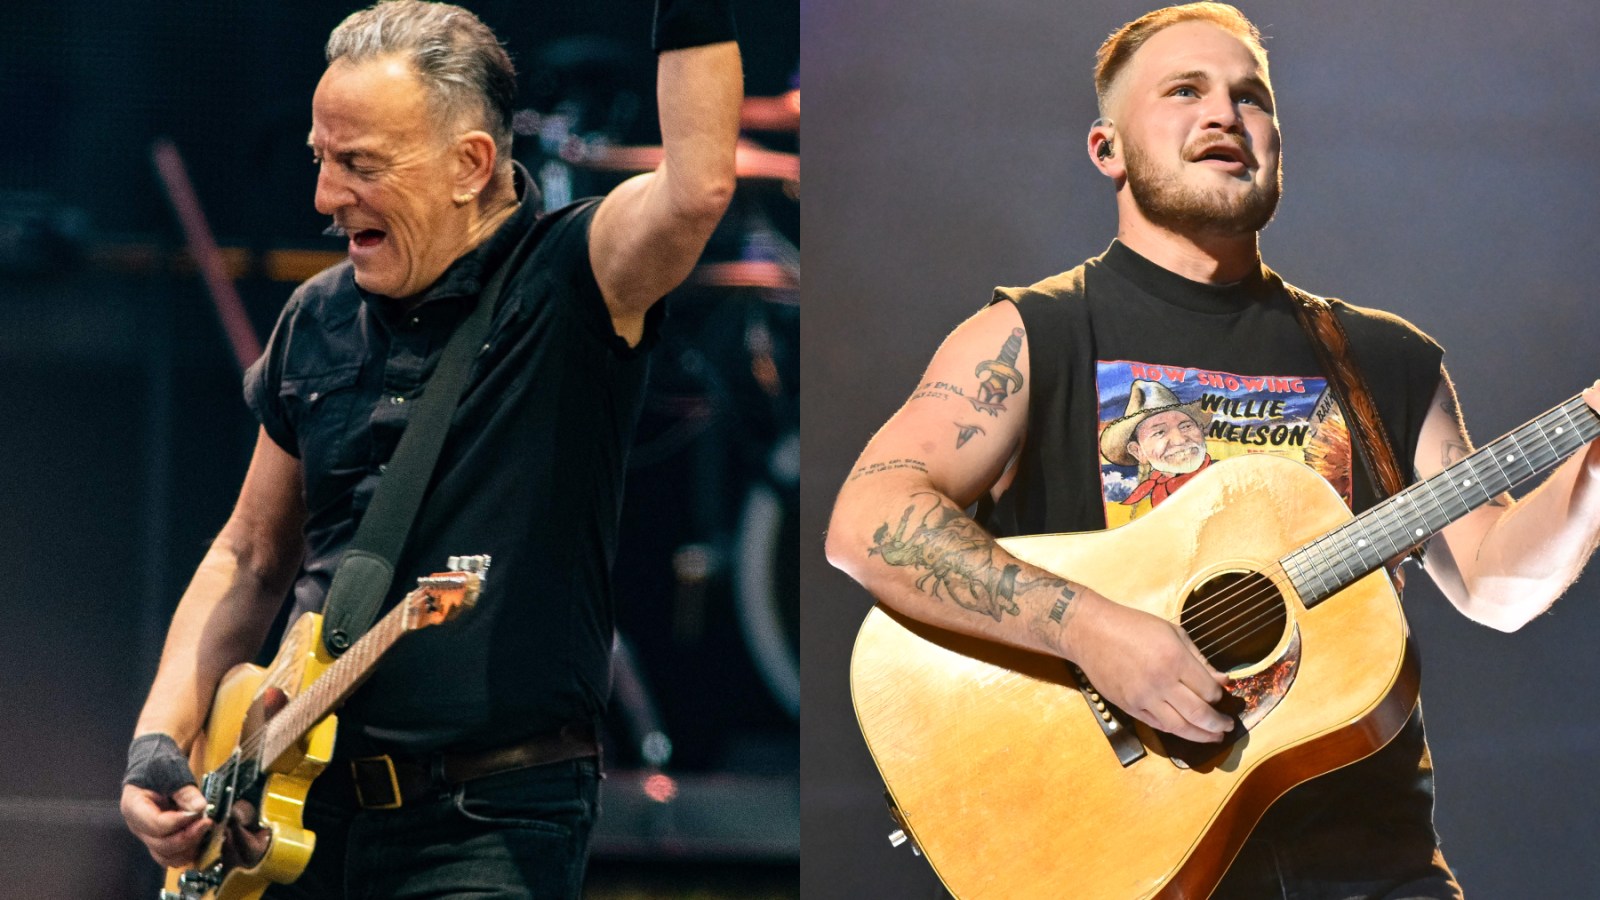 Bruce Springsteen Joins Zach Bryan Onstage at Triumphant Brooklyn Show